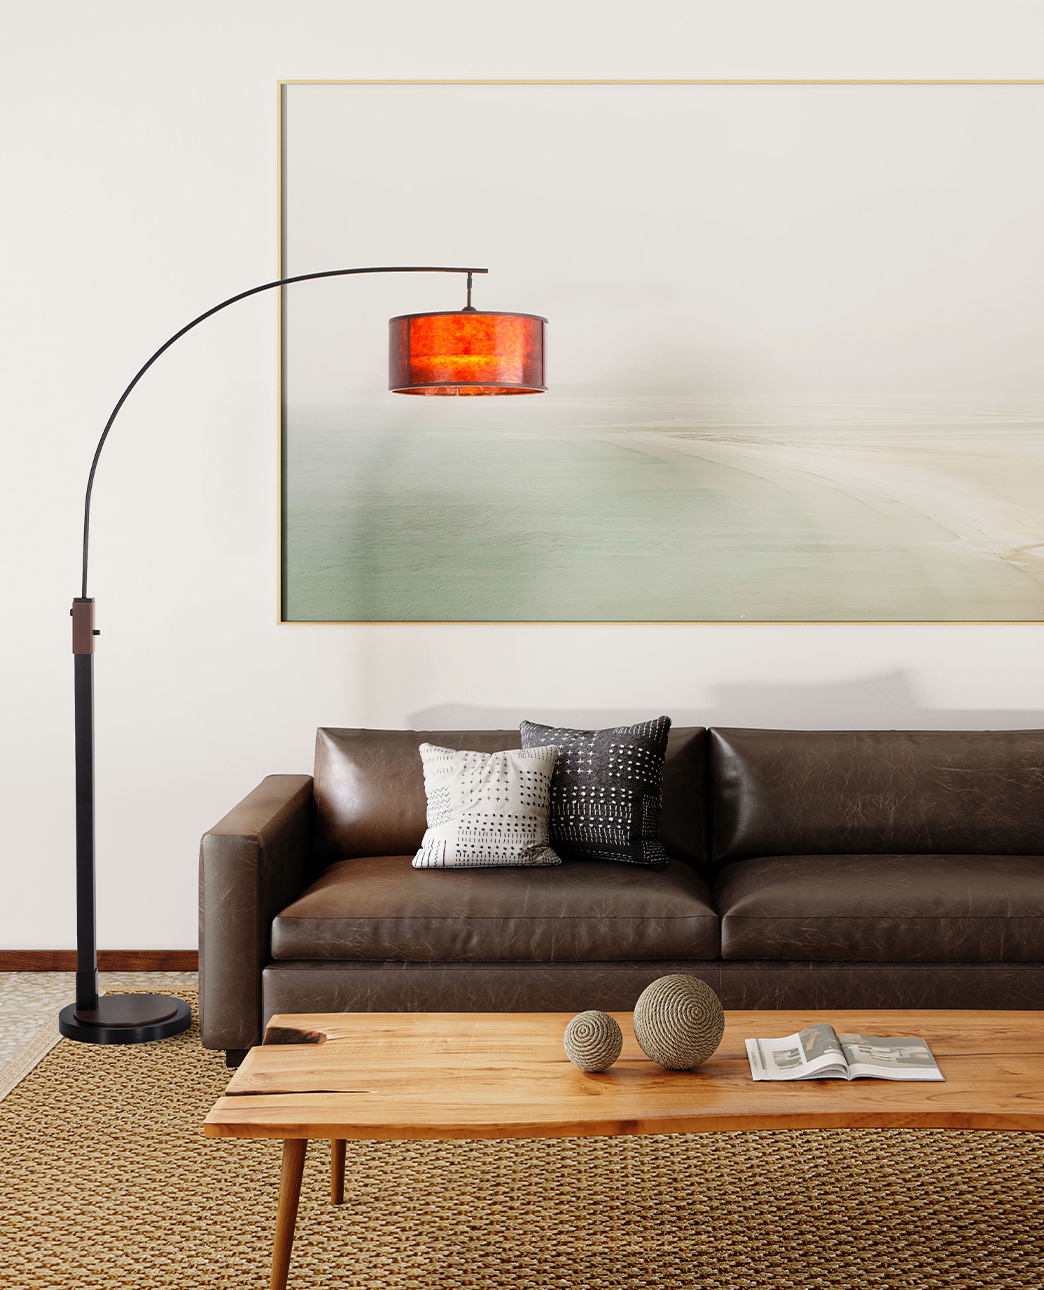 Layers 86″ Natural Mica 1 Light Arc Lamp in Charcoal Gray and Gunmetal with Dimmer Switch